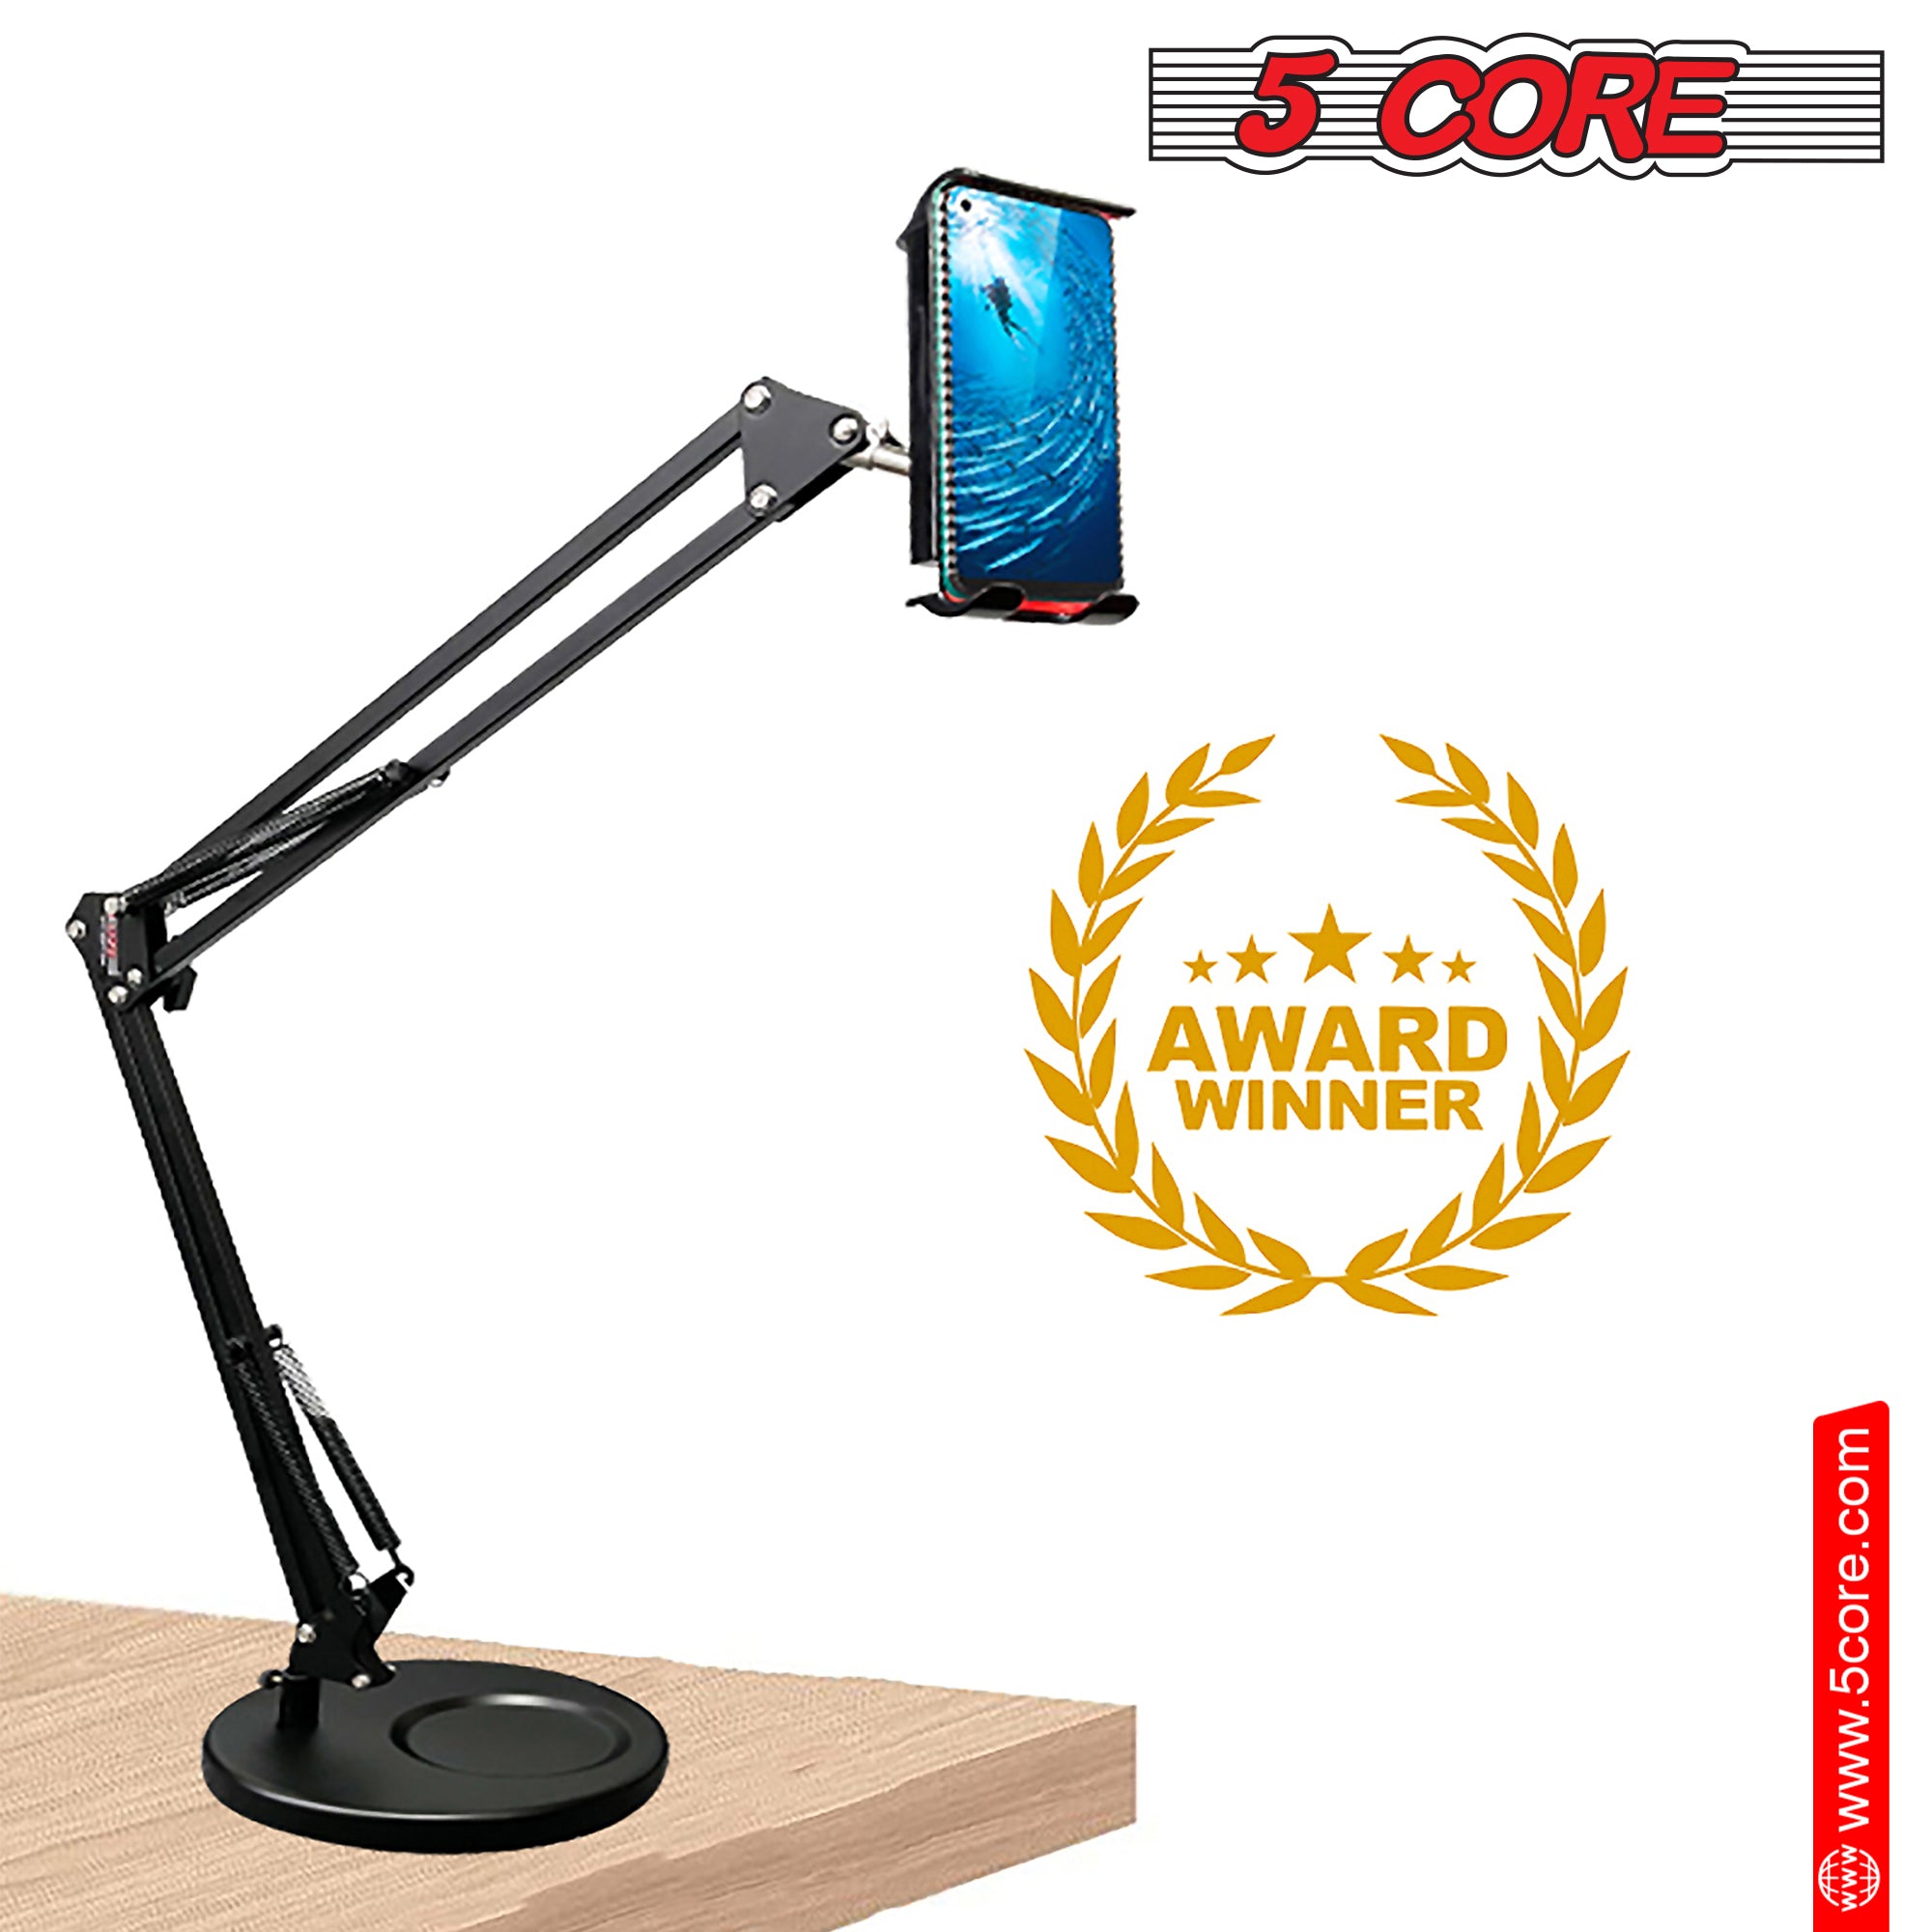 5 Core Cell Phone Stand for Desk • Adjustable & Flexible Universal Phone Holder • Sturdy Metal Build